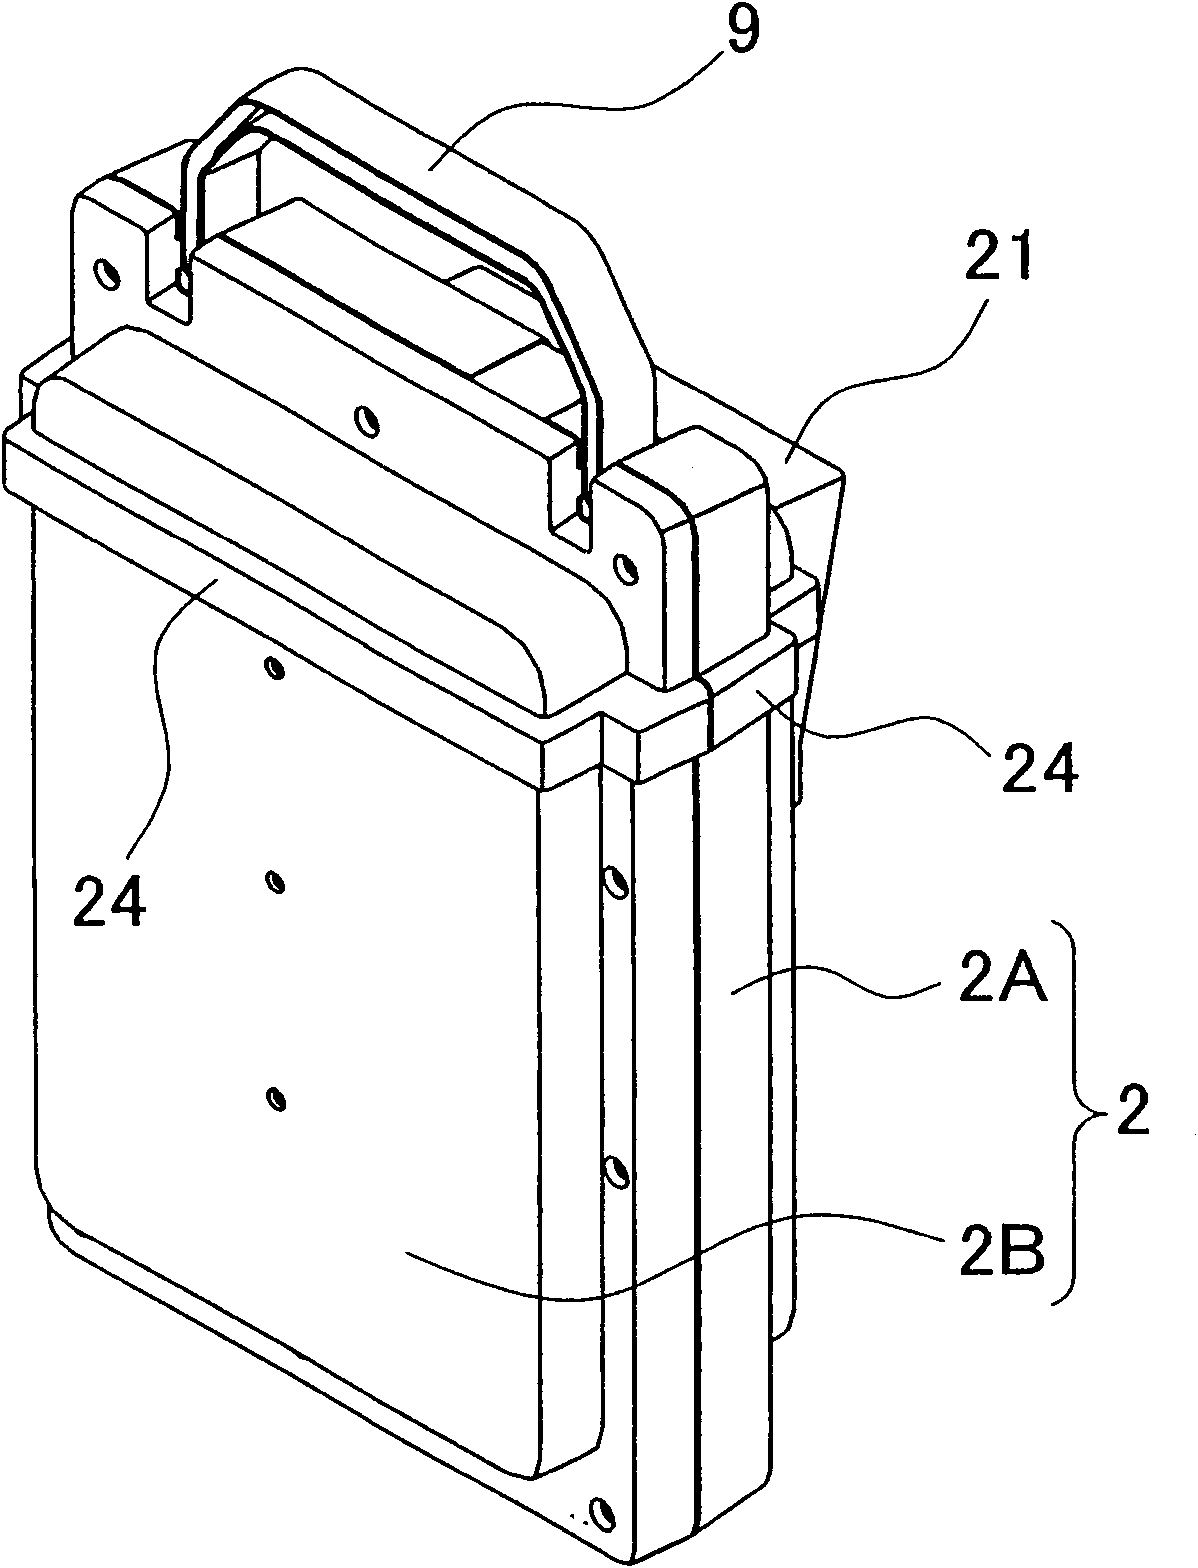 Battery pack loaded and unloaded relatove to electric vehicle tool and electric vehicle tool with the same